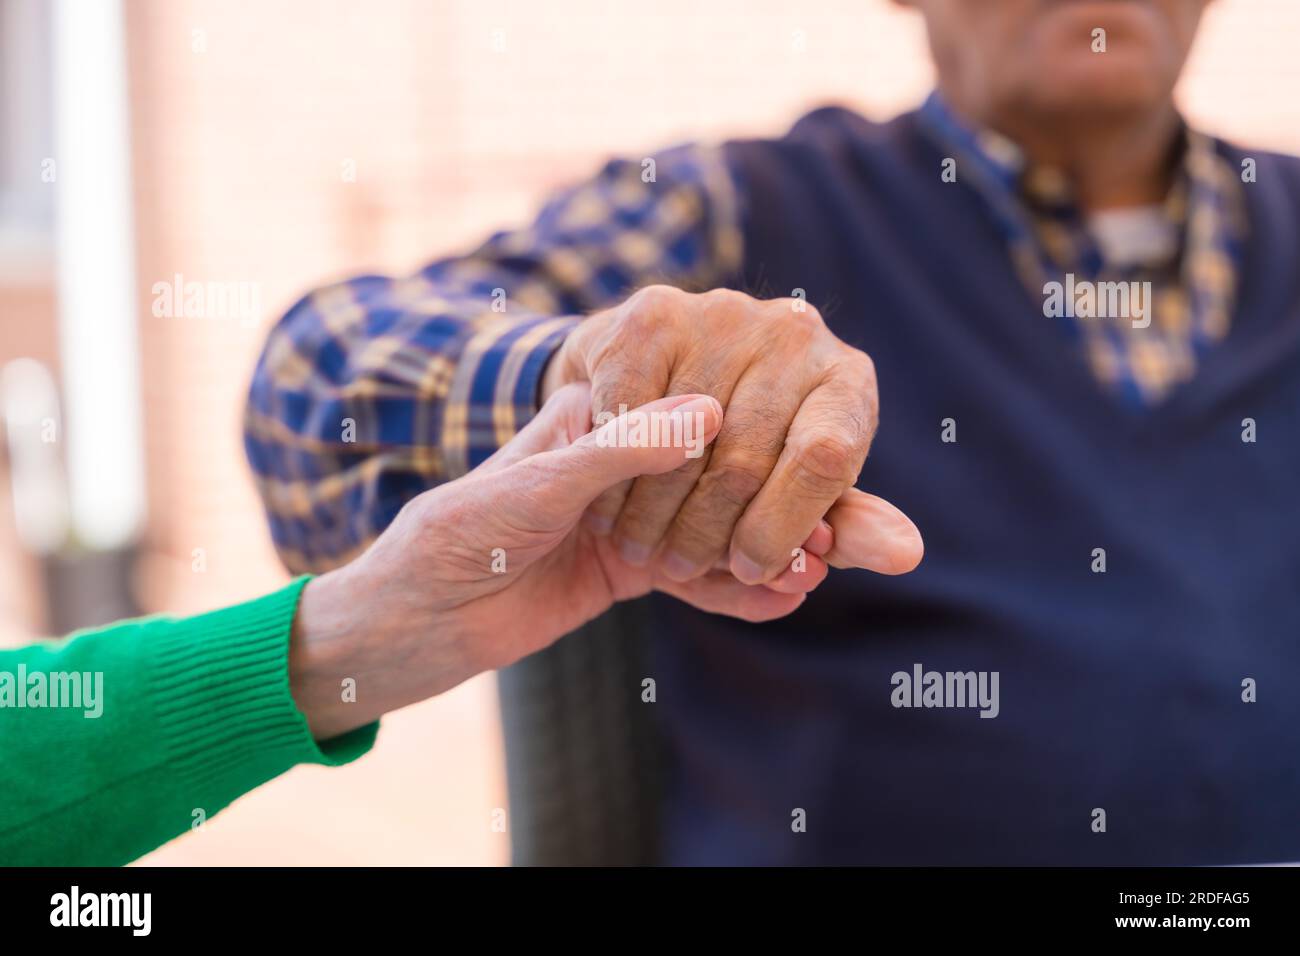 Detail of the hands of two elderly people in the garden of a nursing home or retirement home holding hands in a moment of affection Stock Photo